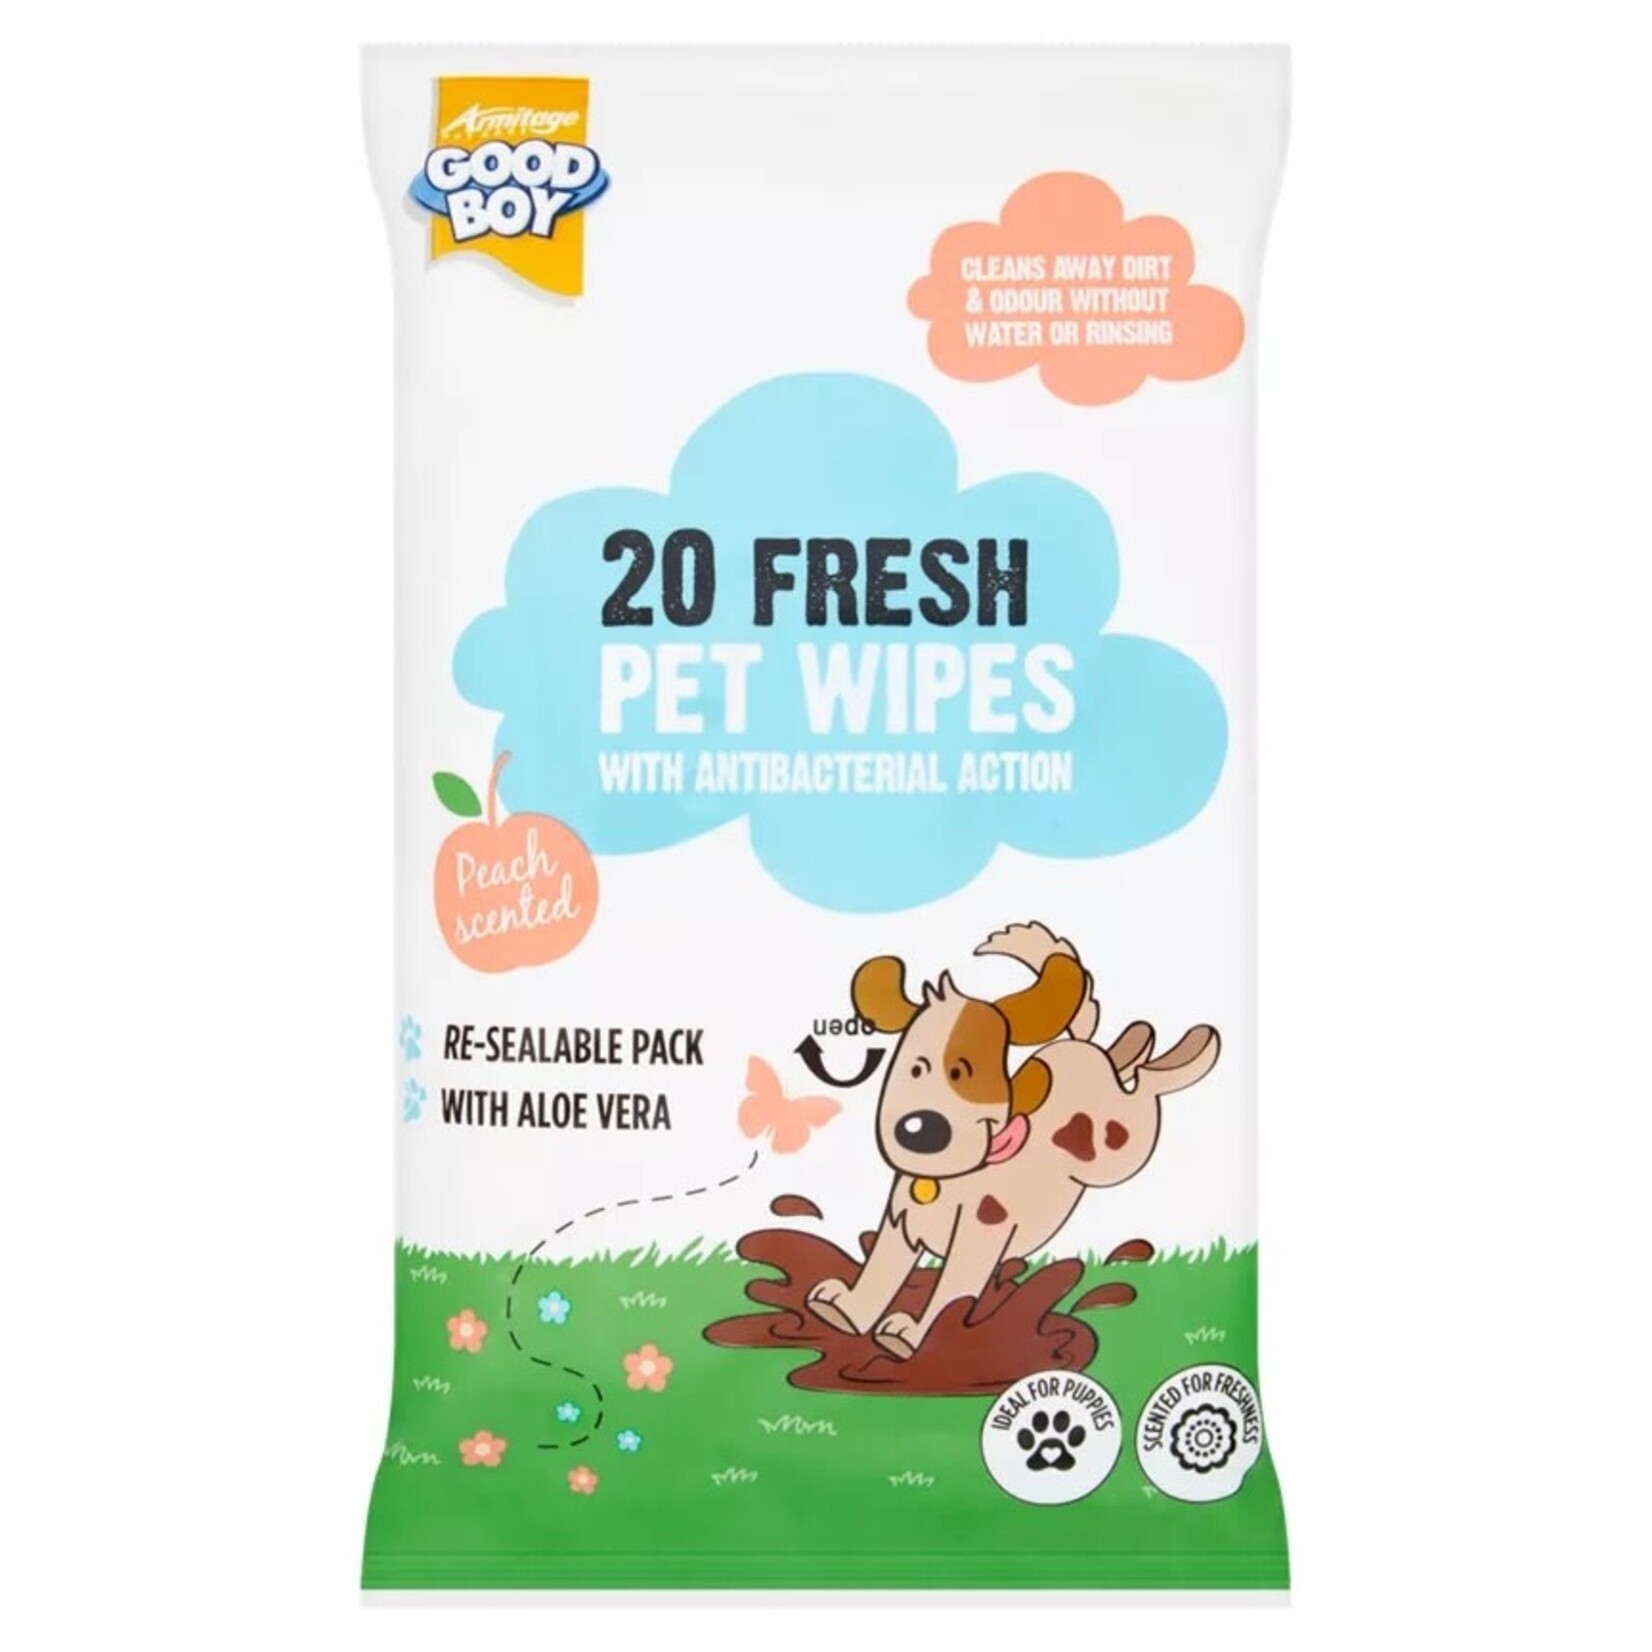 Good Boy Clean & Kind Compostable Large Pet Wipes, pack of 20